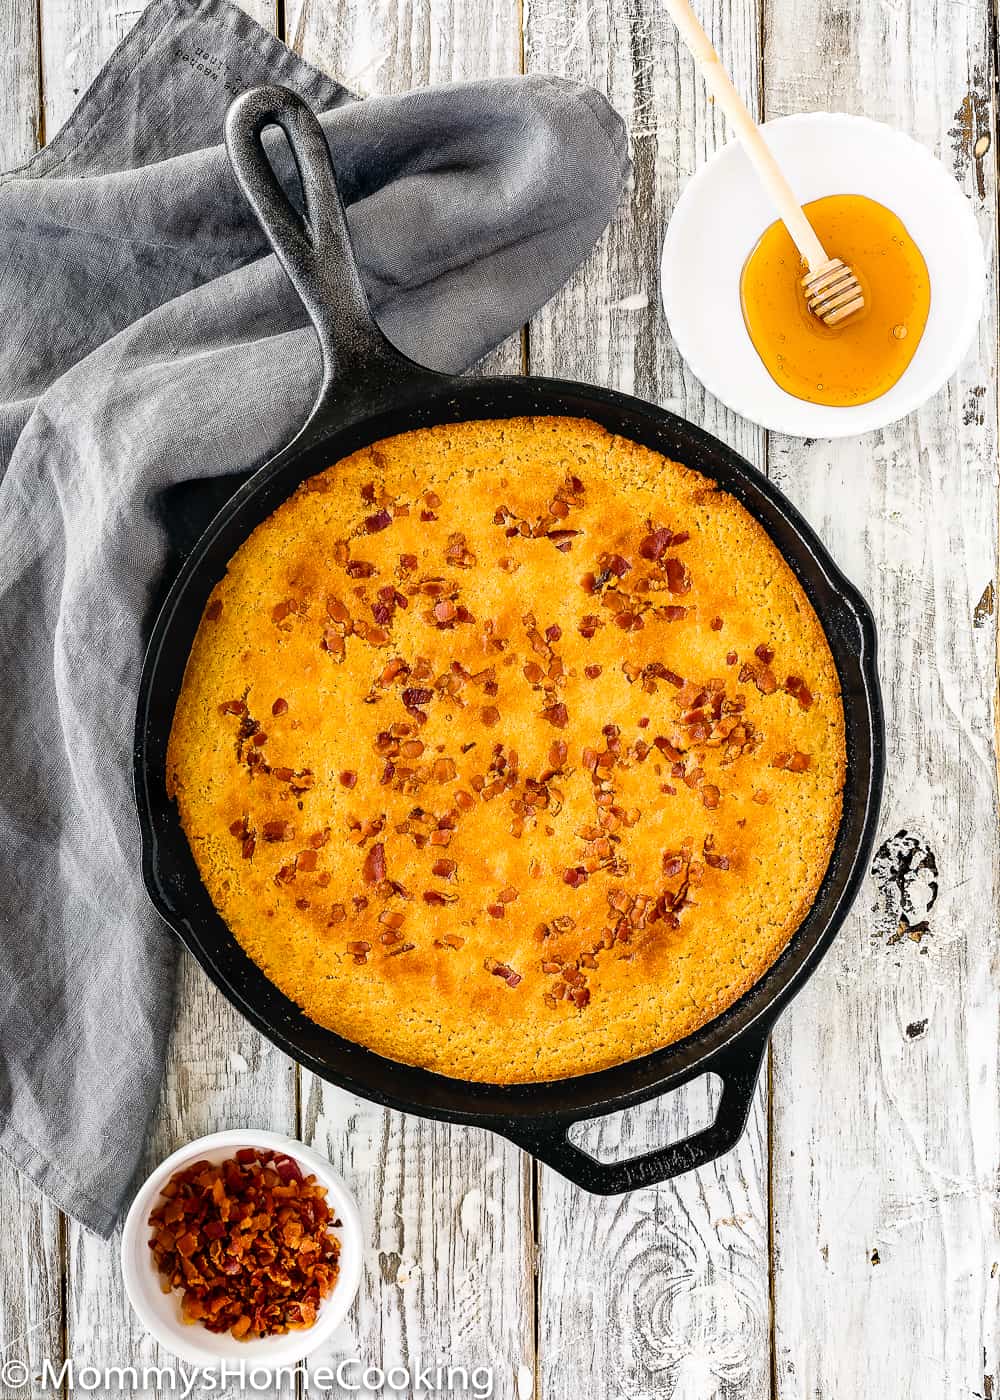 Click to learn how to make The BEST Eggless Cornbread! This
        eggless cornbread has a super moist, tender crumb that is not
        dry at all. Made with simple ingredients this effortless recipe
        is ready in 30 minutes! https://mommyshomecooking.com